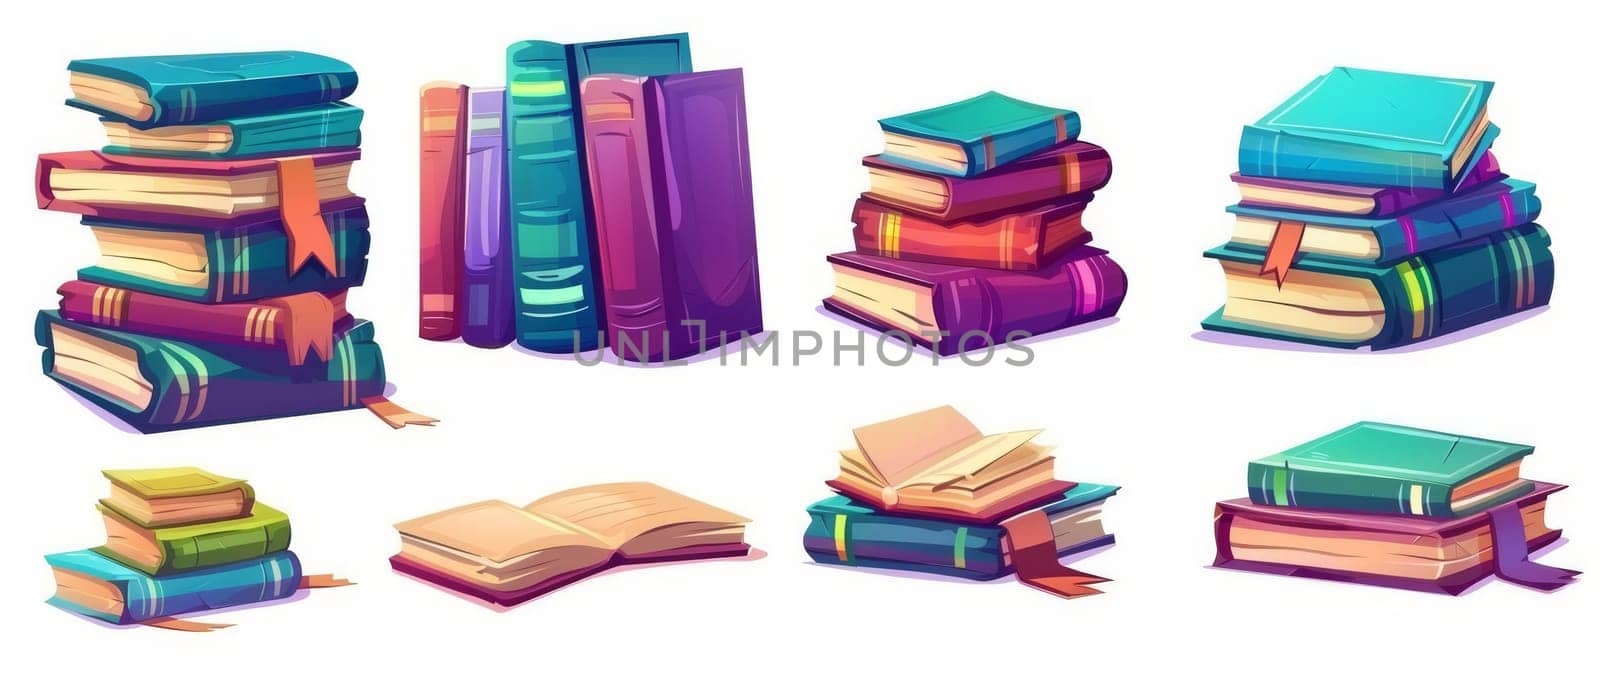 The piles of books with paper pages, colorful hardcovers, and bookmarks for reading and education concept. Cartoon modern illustration set featuring book stacks and singles.